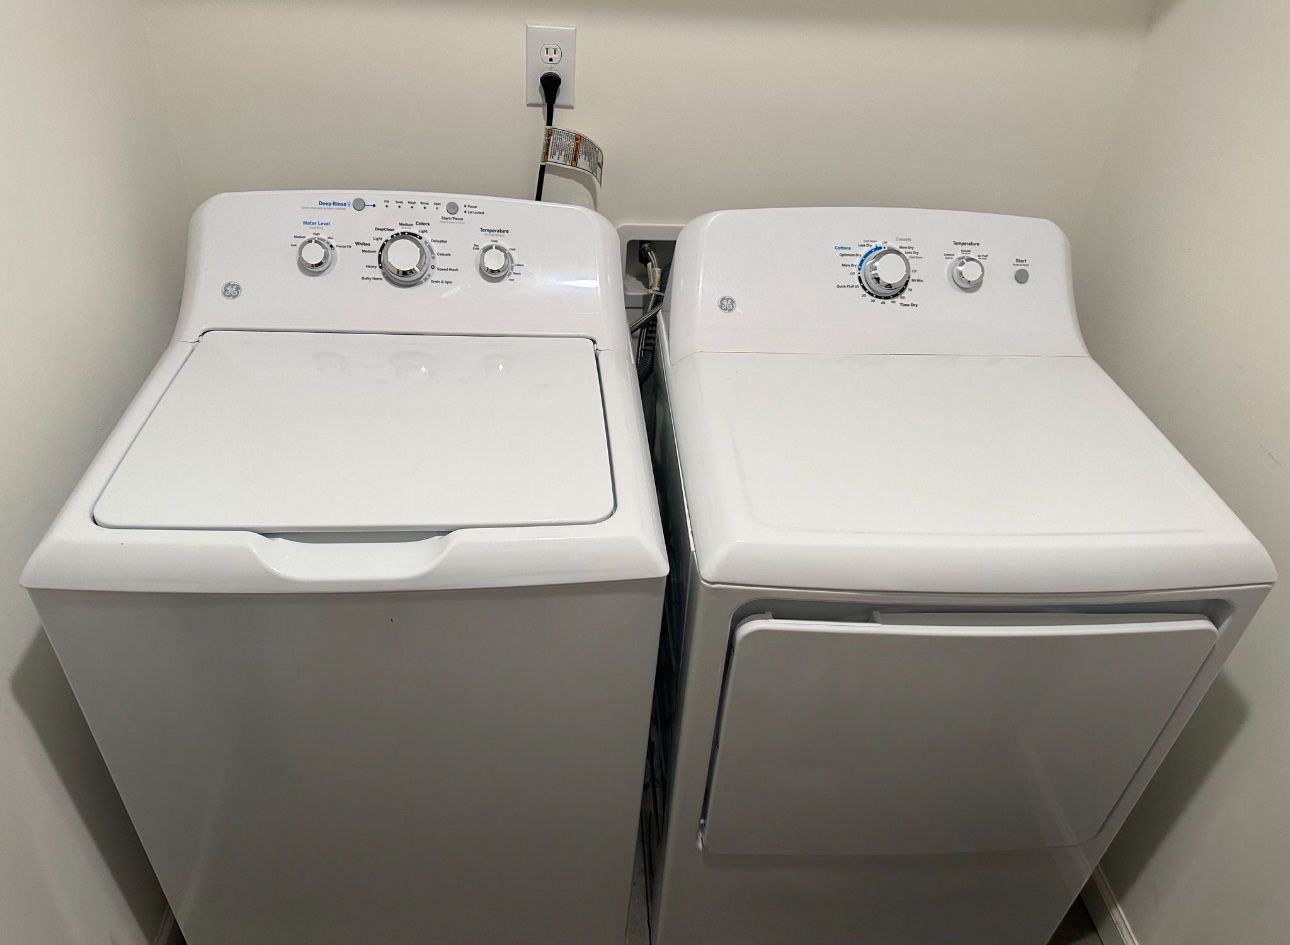 Washer & Dryer For Sale